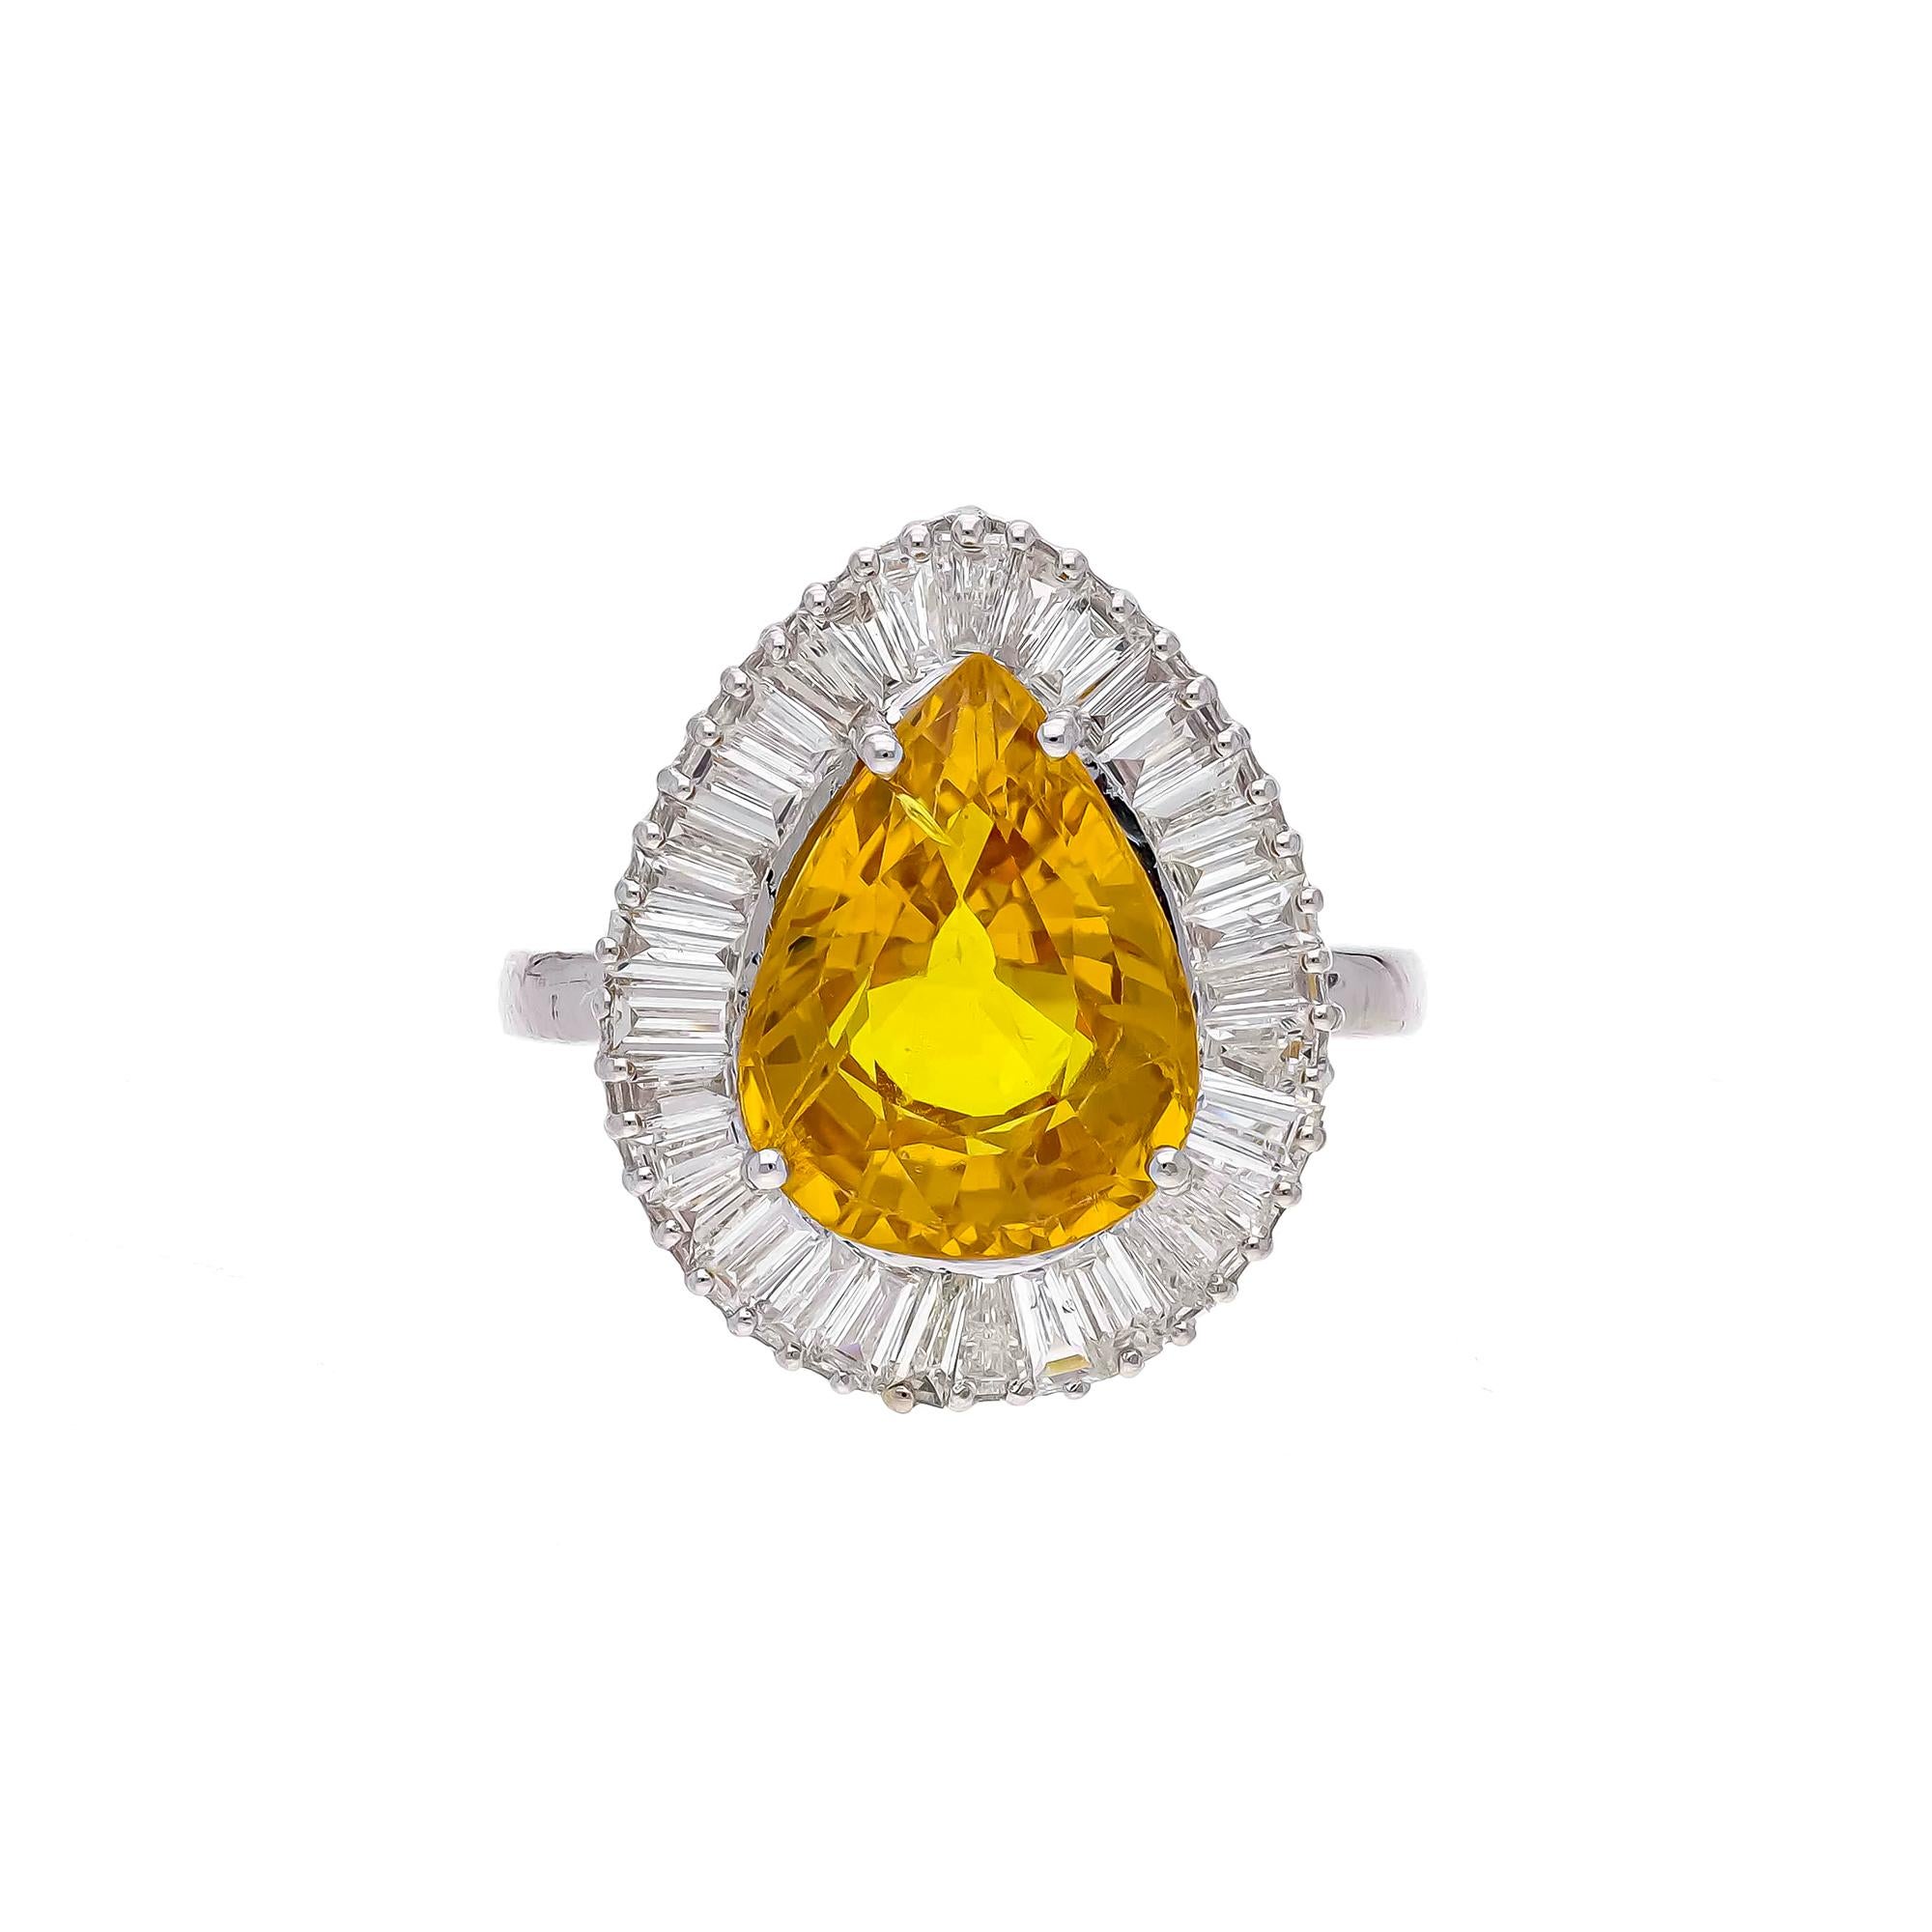 this is an amazing ring with
diamond : 1.30 carats
yellow sapphire : 6.63 carats
gold : 4.224 gms


Please read my reviews to make yourself comfortable.
I don't want to sell just one time but make customers for life.
All our jewelry comes with a